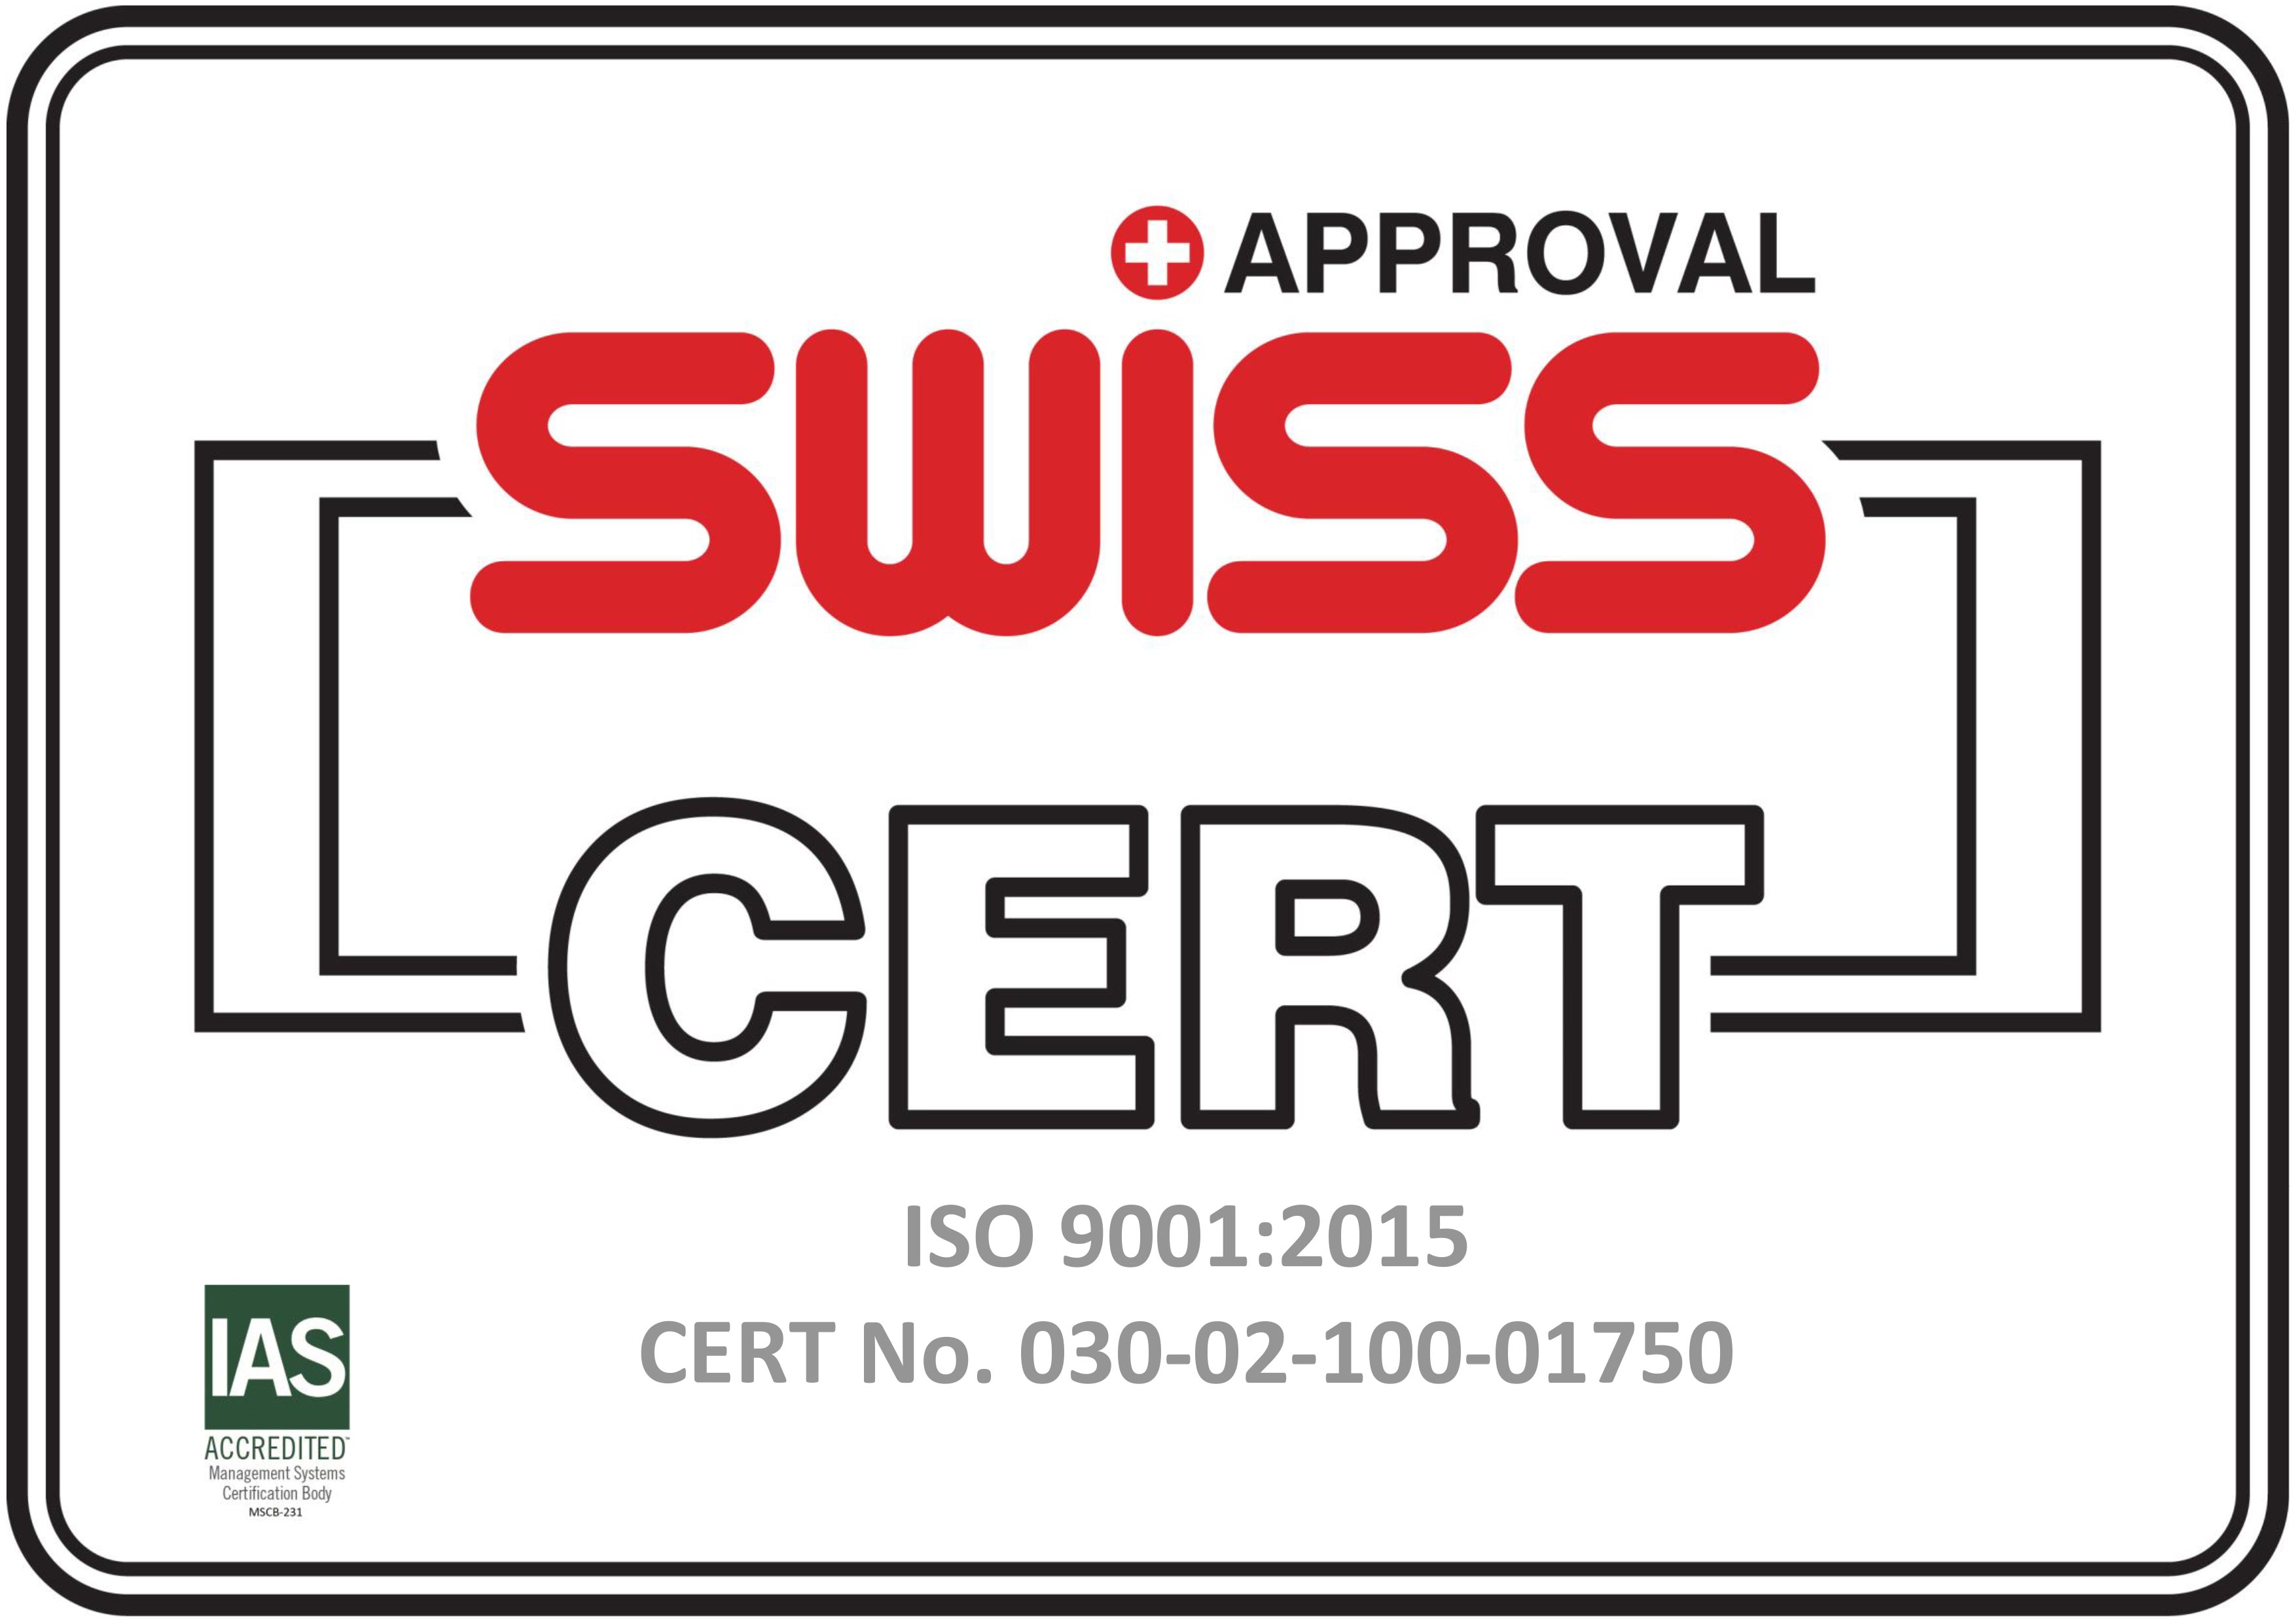 announcement OF THE ISO 9001:2015 certification